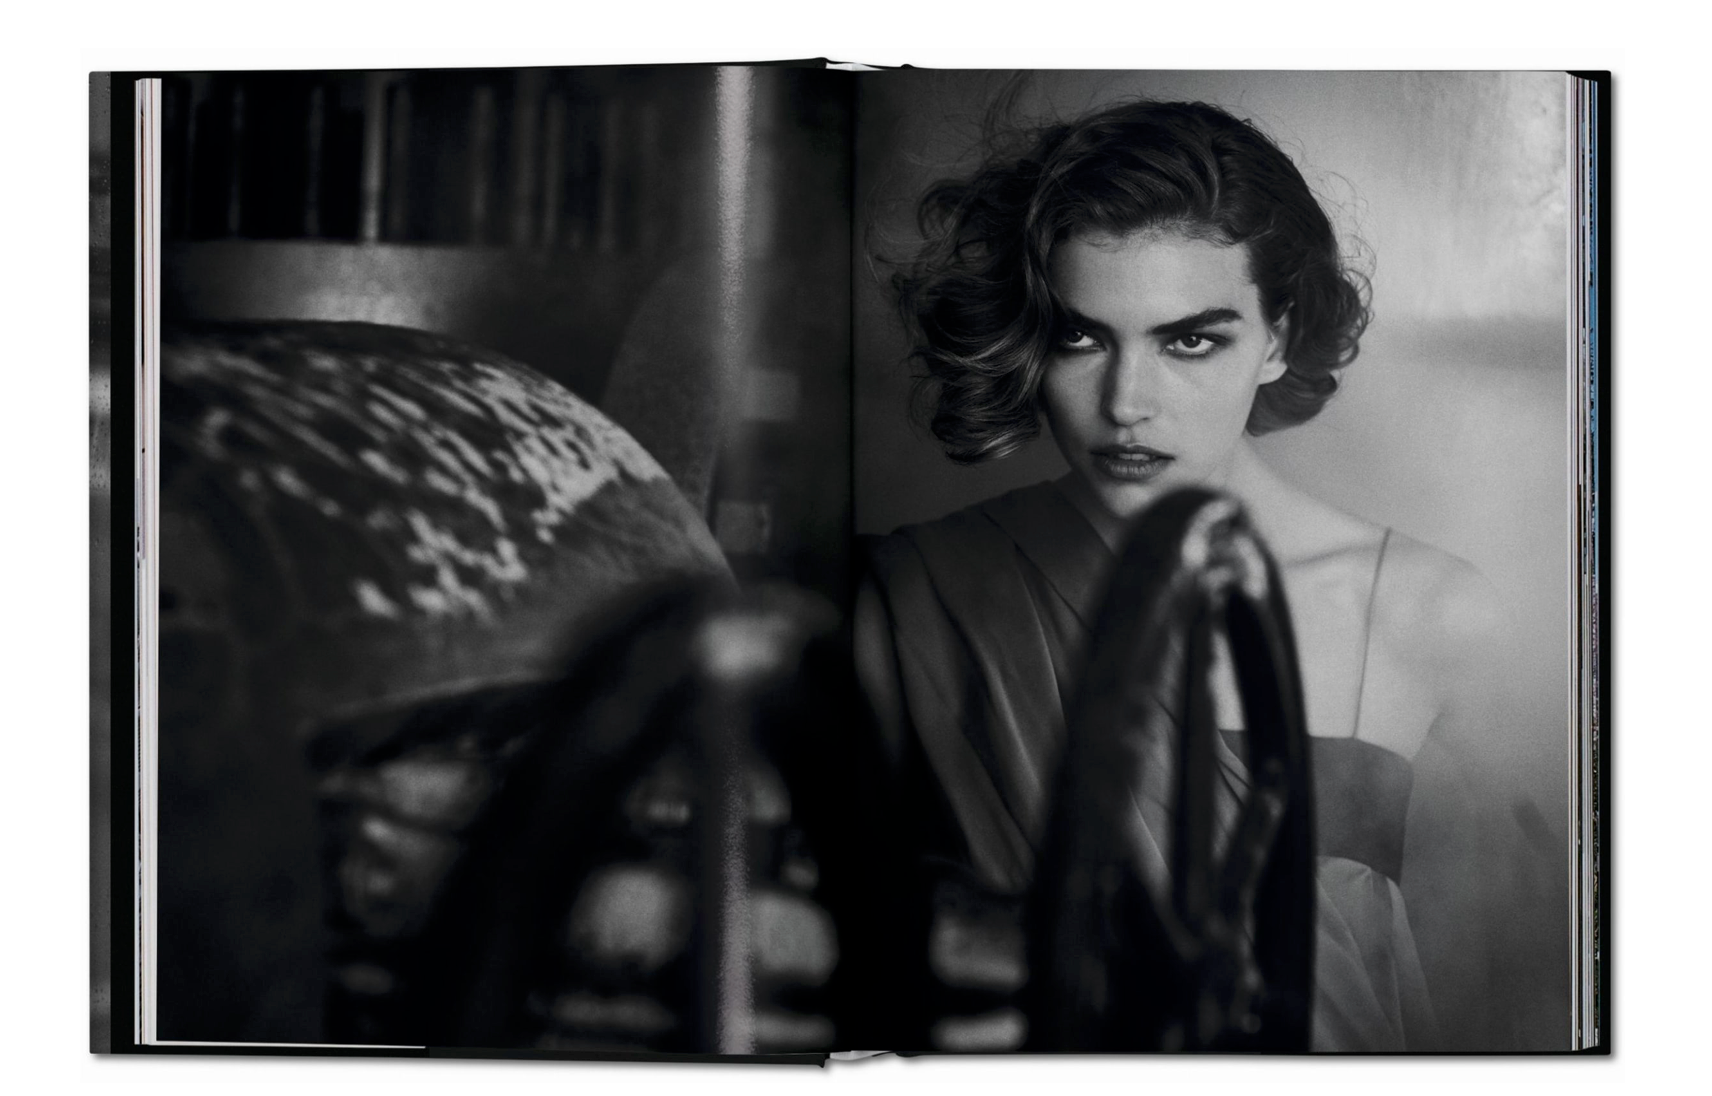 PETER LINDBERGH ON FASHION PHOTOGRAPHY BOOK – MIXED BY DESIGN